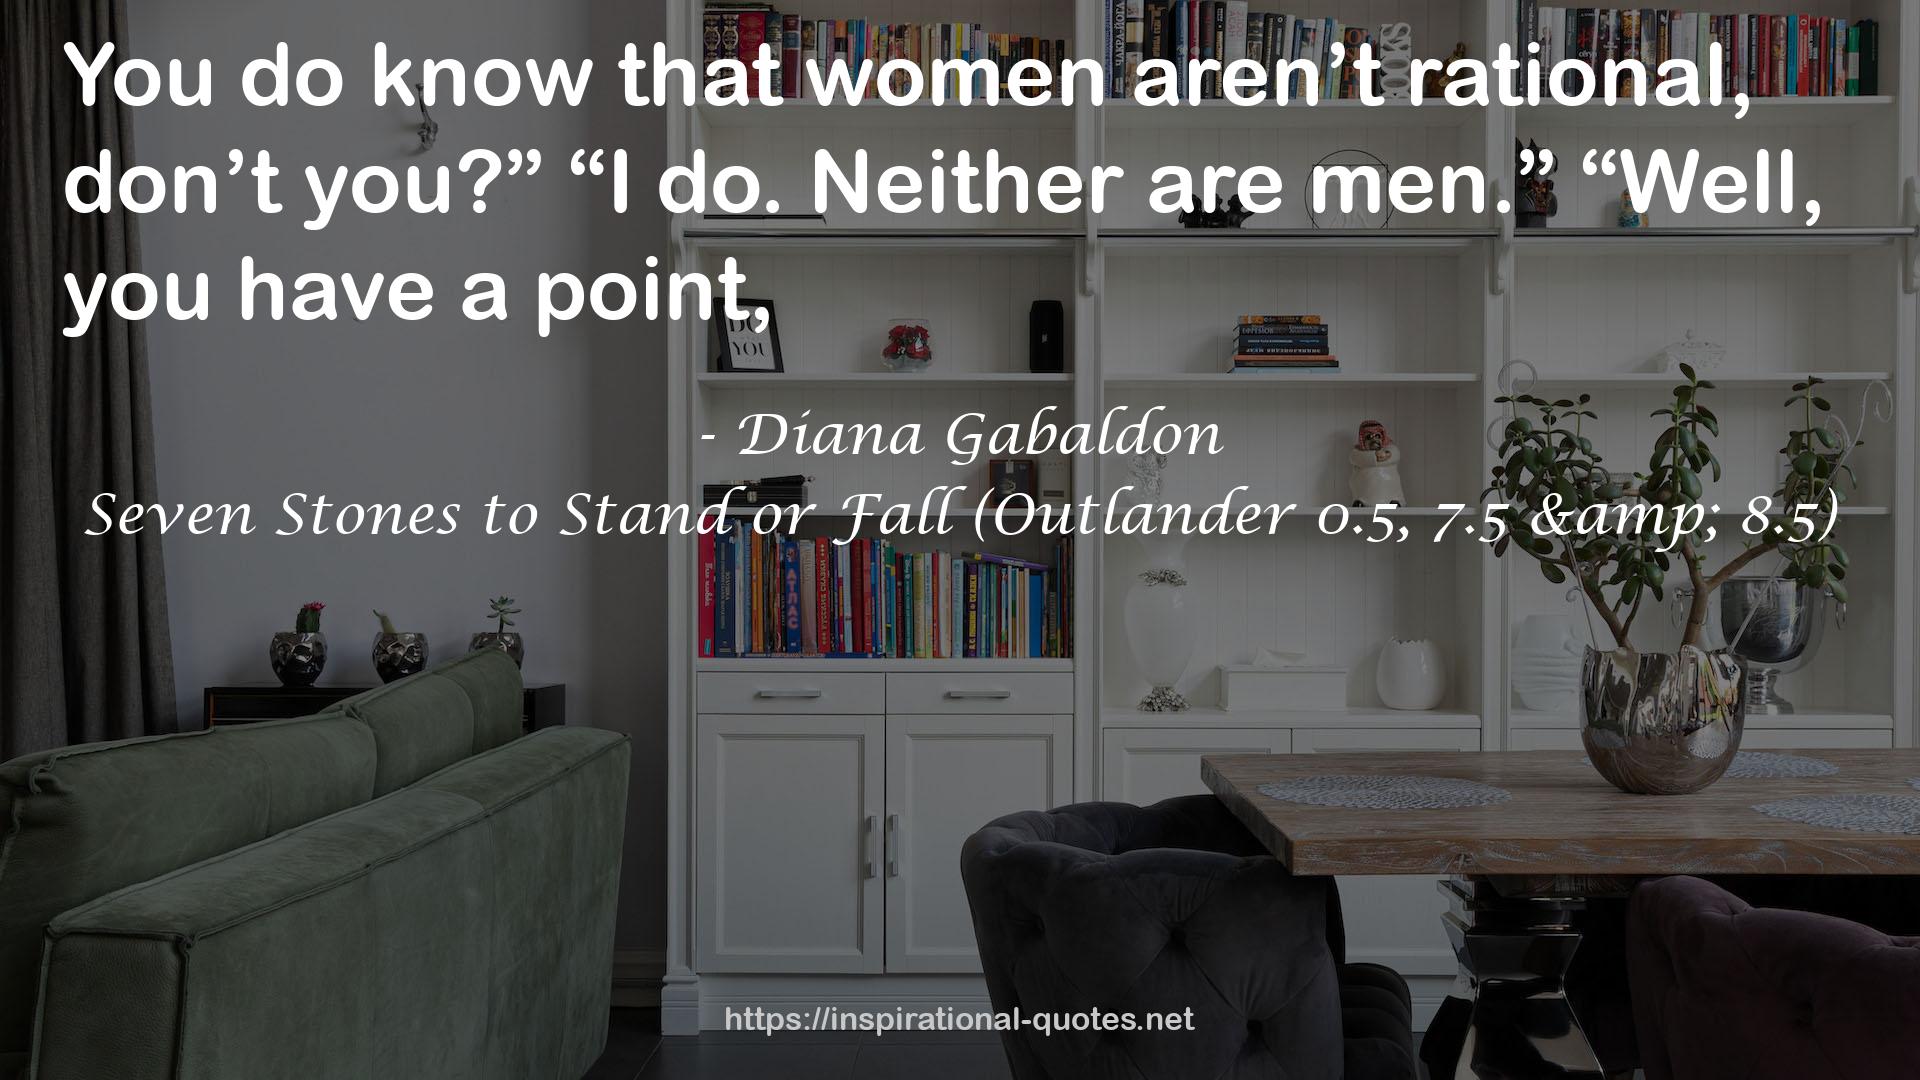 Seven Stones to Stand or Fall (Outlander 0.5, 7.5 & 8.5) QUOTES